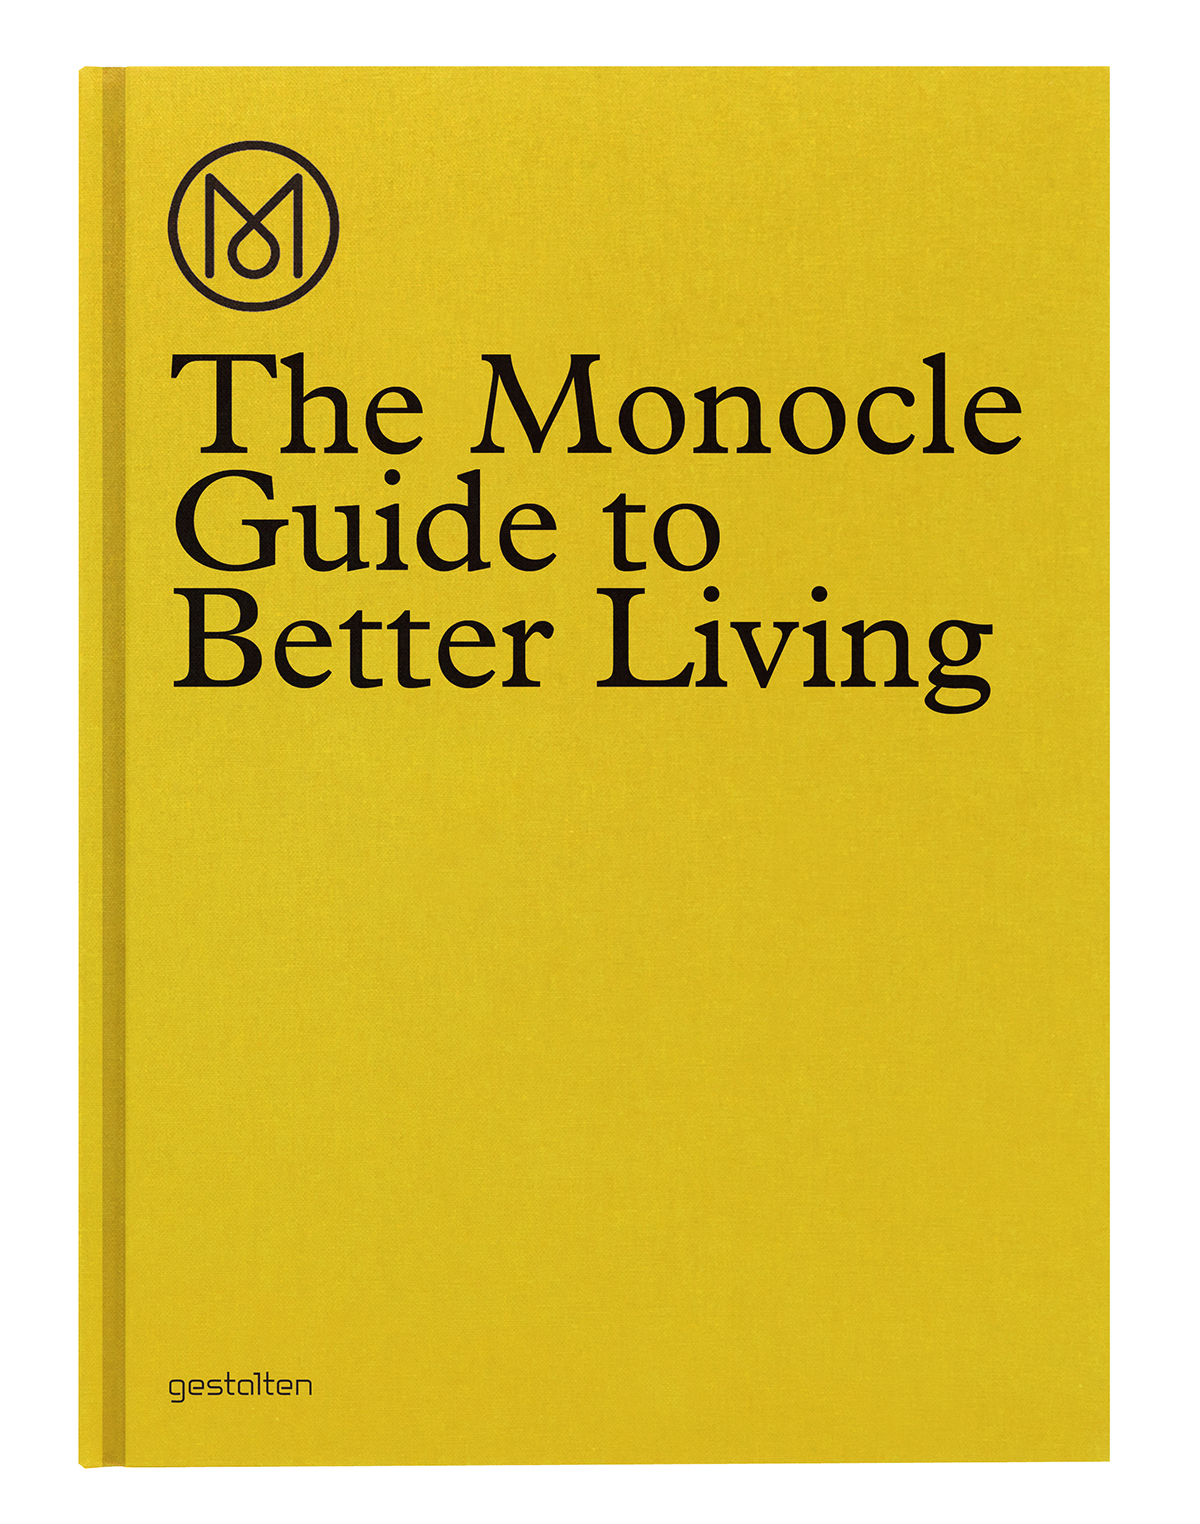 The Monocle Guide to Better Living,